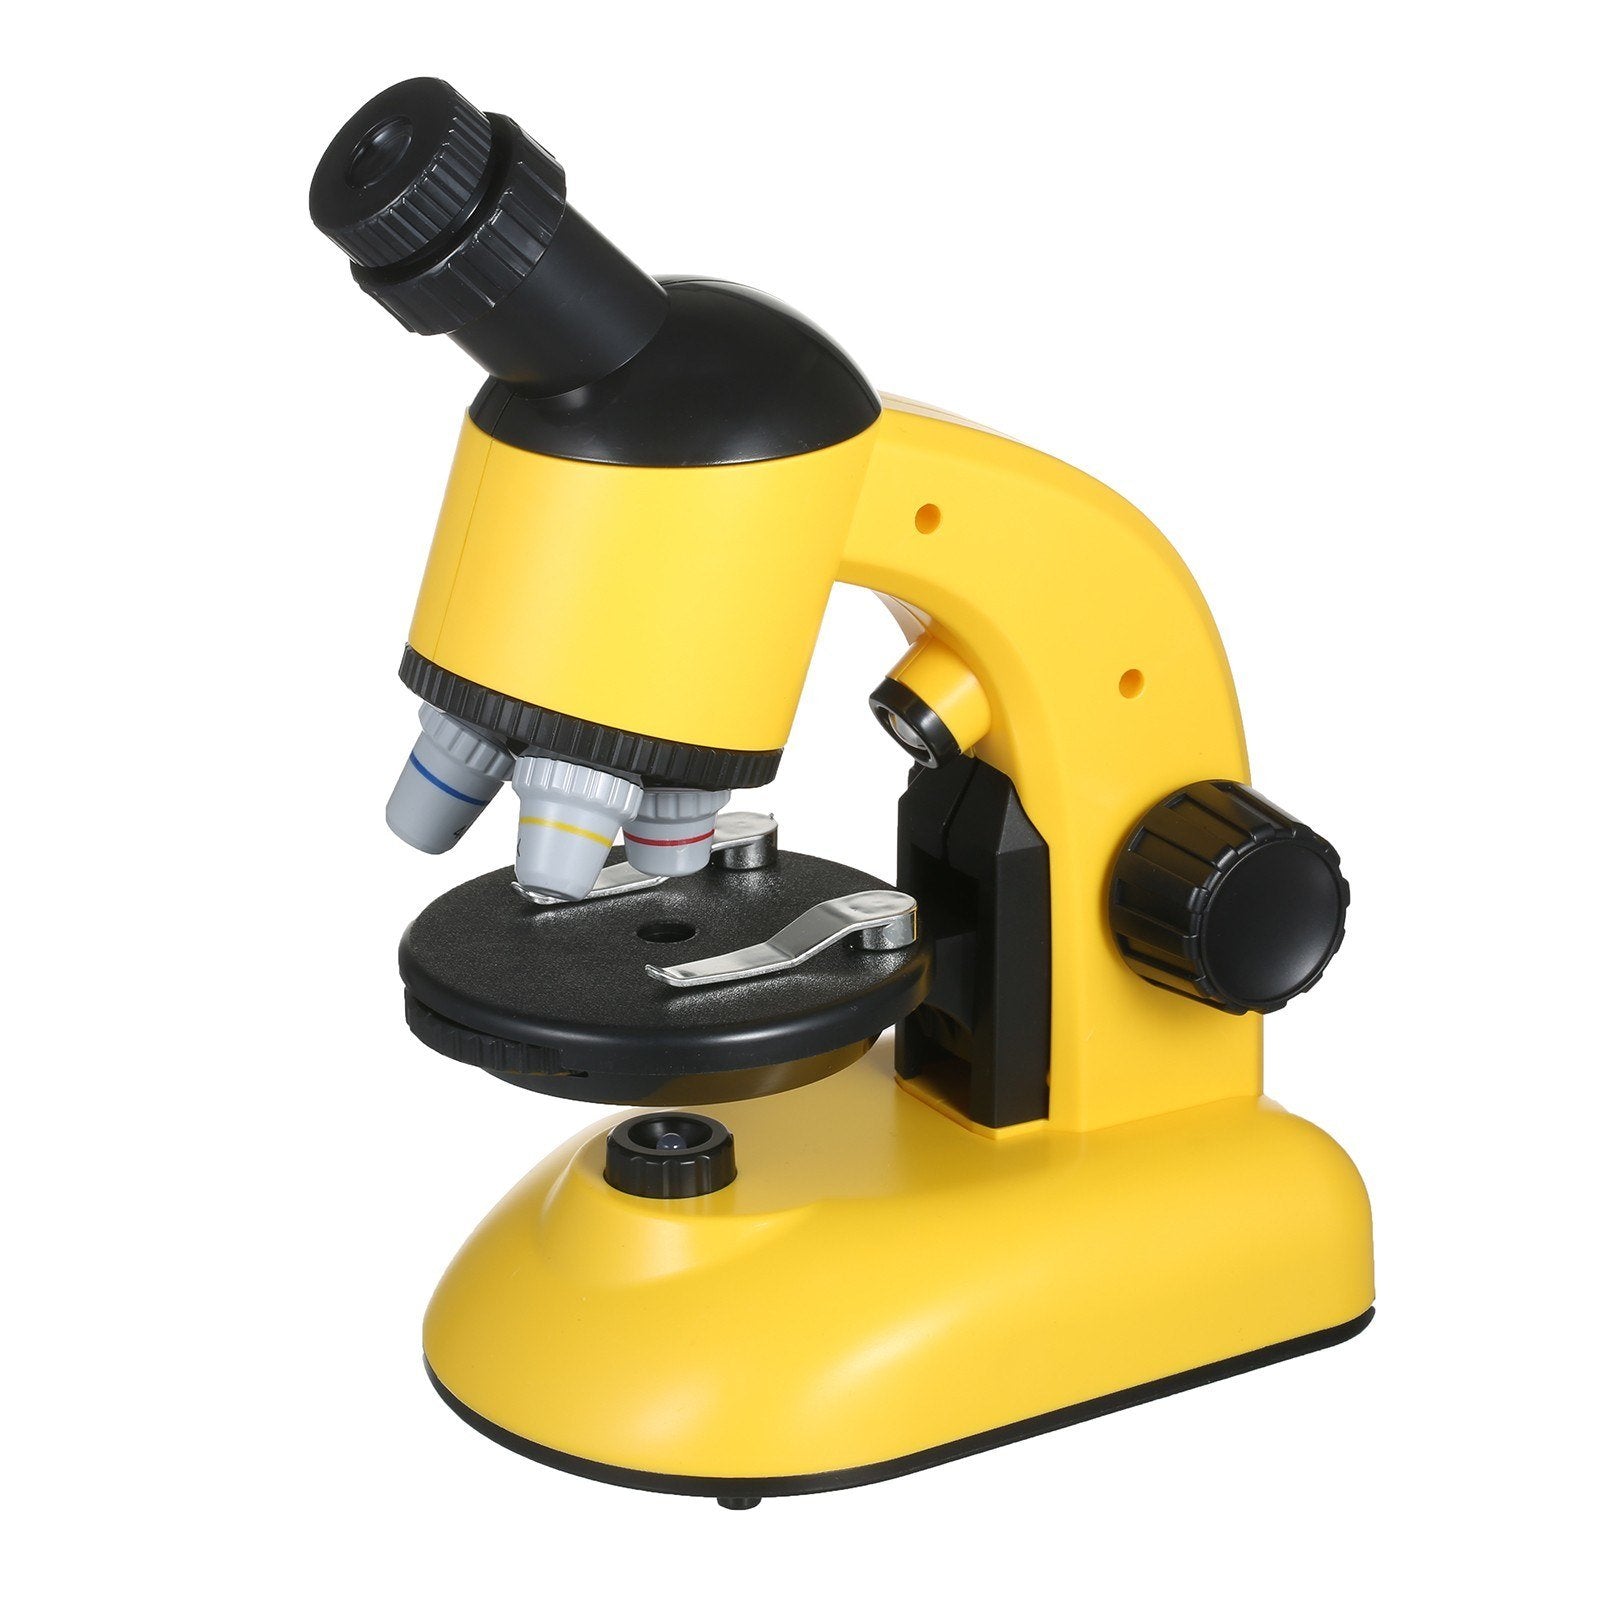 Kids Microscope Objects and Specimen Observation Magnification with Battery LED Light